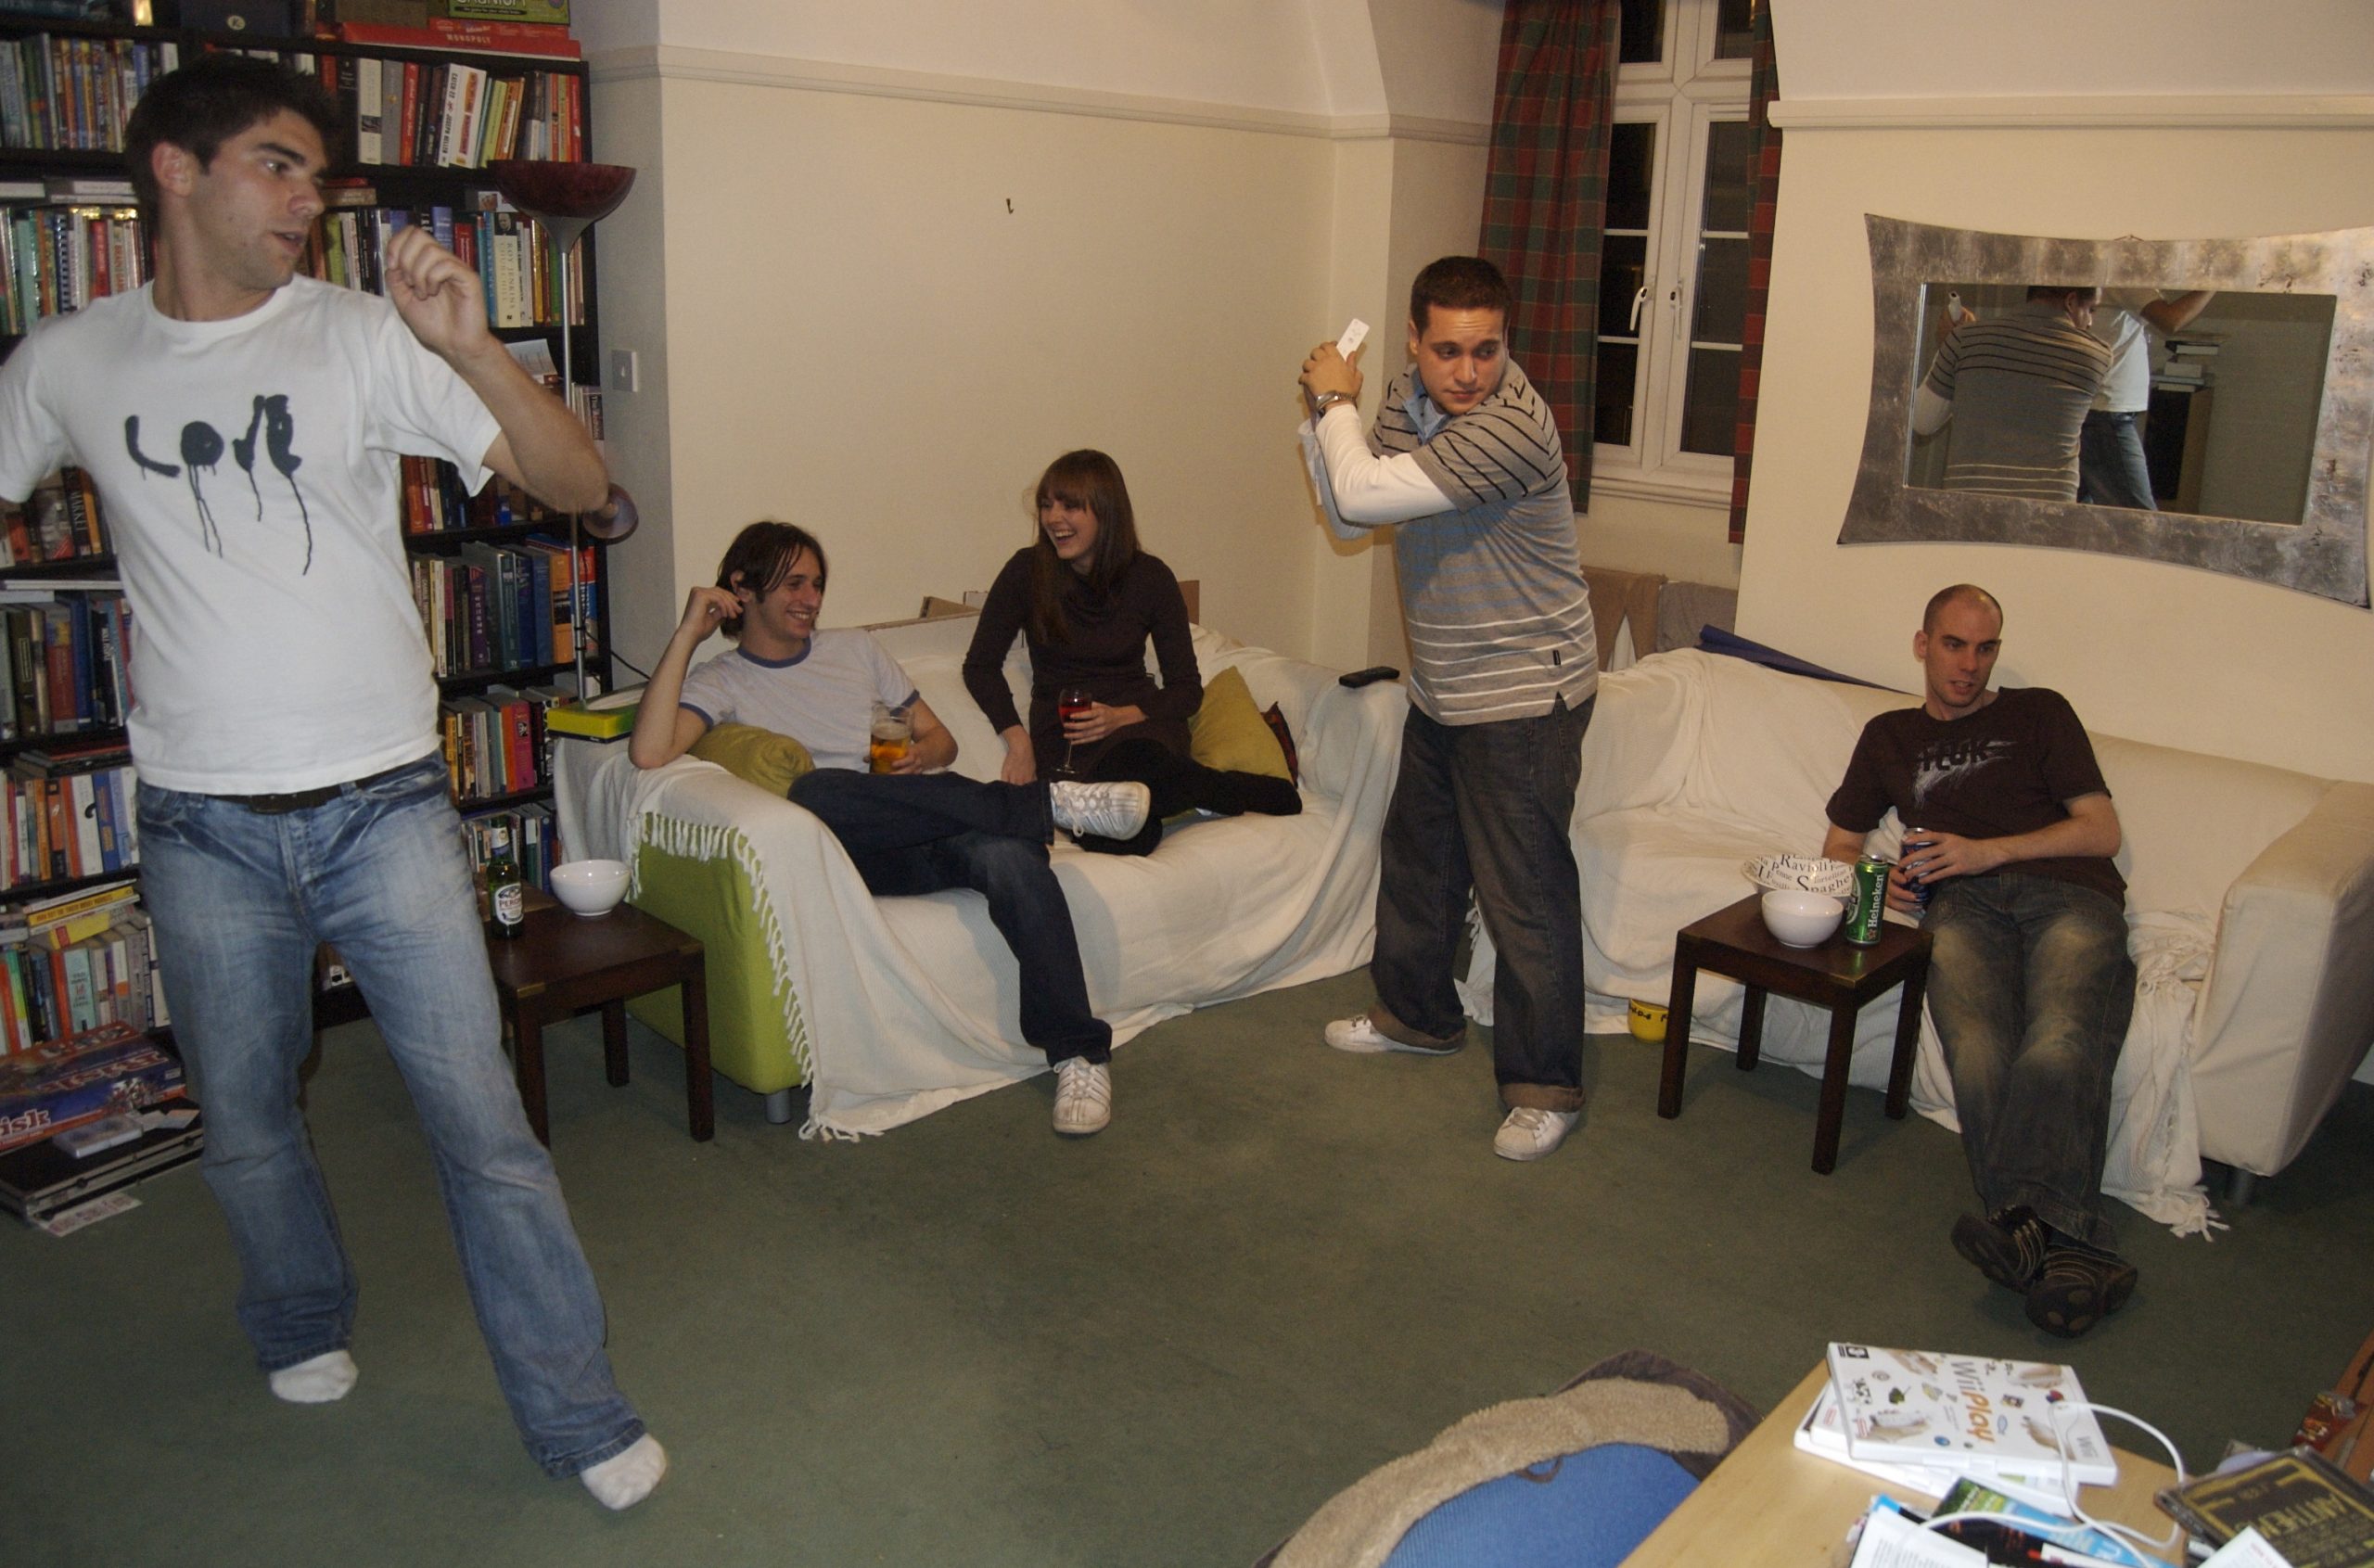 A group of guys playing Wii Sports.